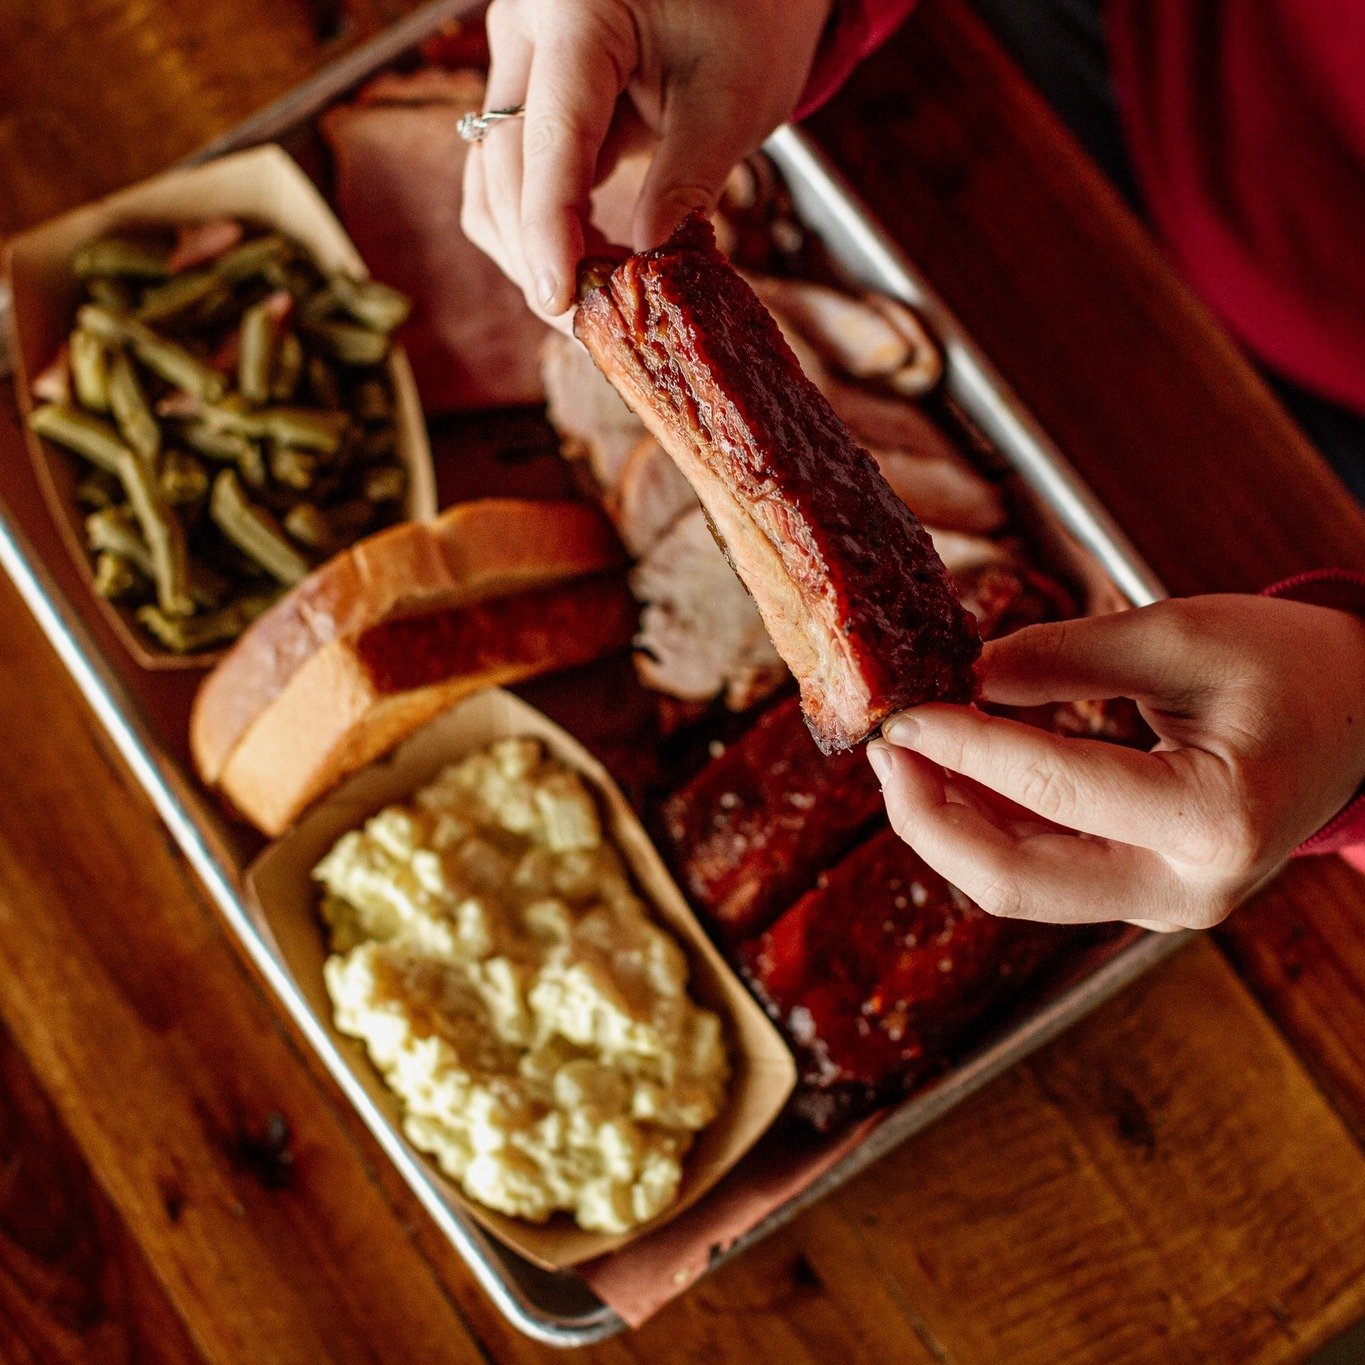 Did you know that generally, people who eat BBQ every day lead happier lives?

Who knew that all it takes is a bite of our juicy ribs or tender brisket to put a smile on your face? Come on over, and let's test this theory together and add some extra 